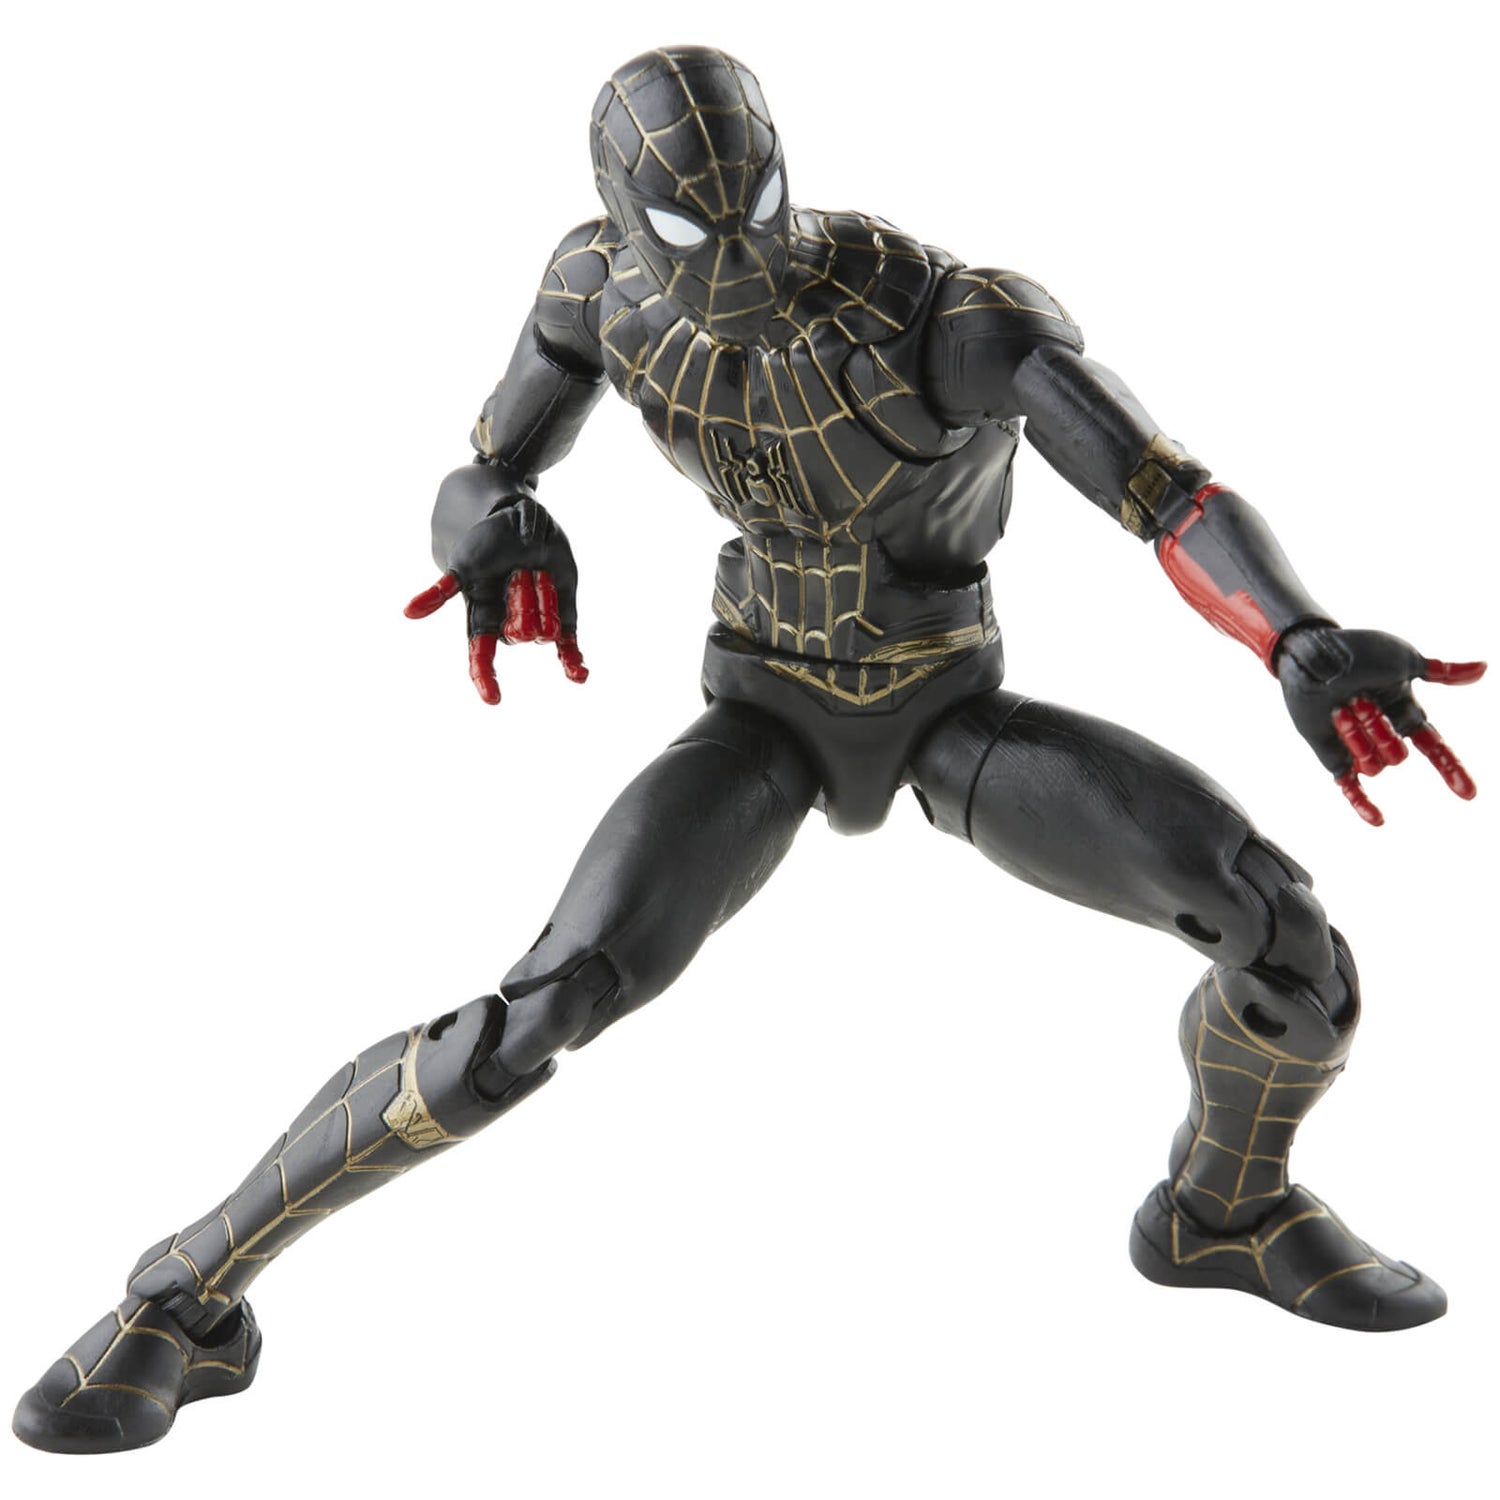 Hasbro Marvel Legends Series Black & Gold Suit Spider-Man 6 Inch Action Figure and Build-A-Figure Part